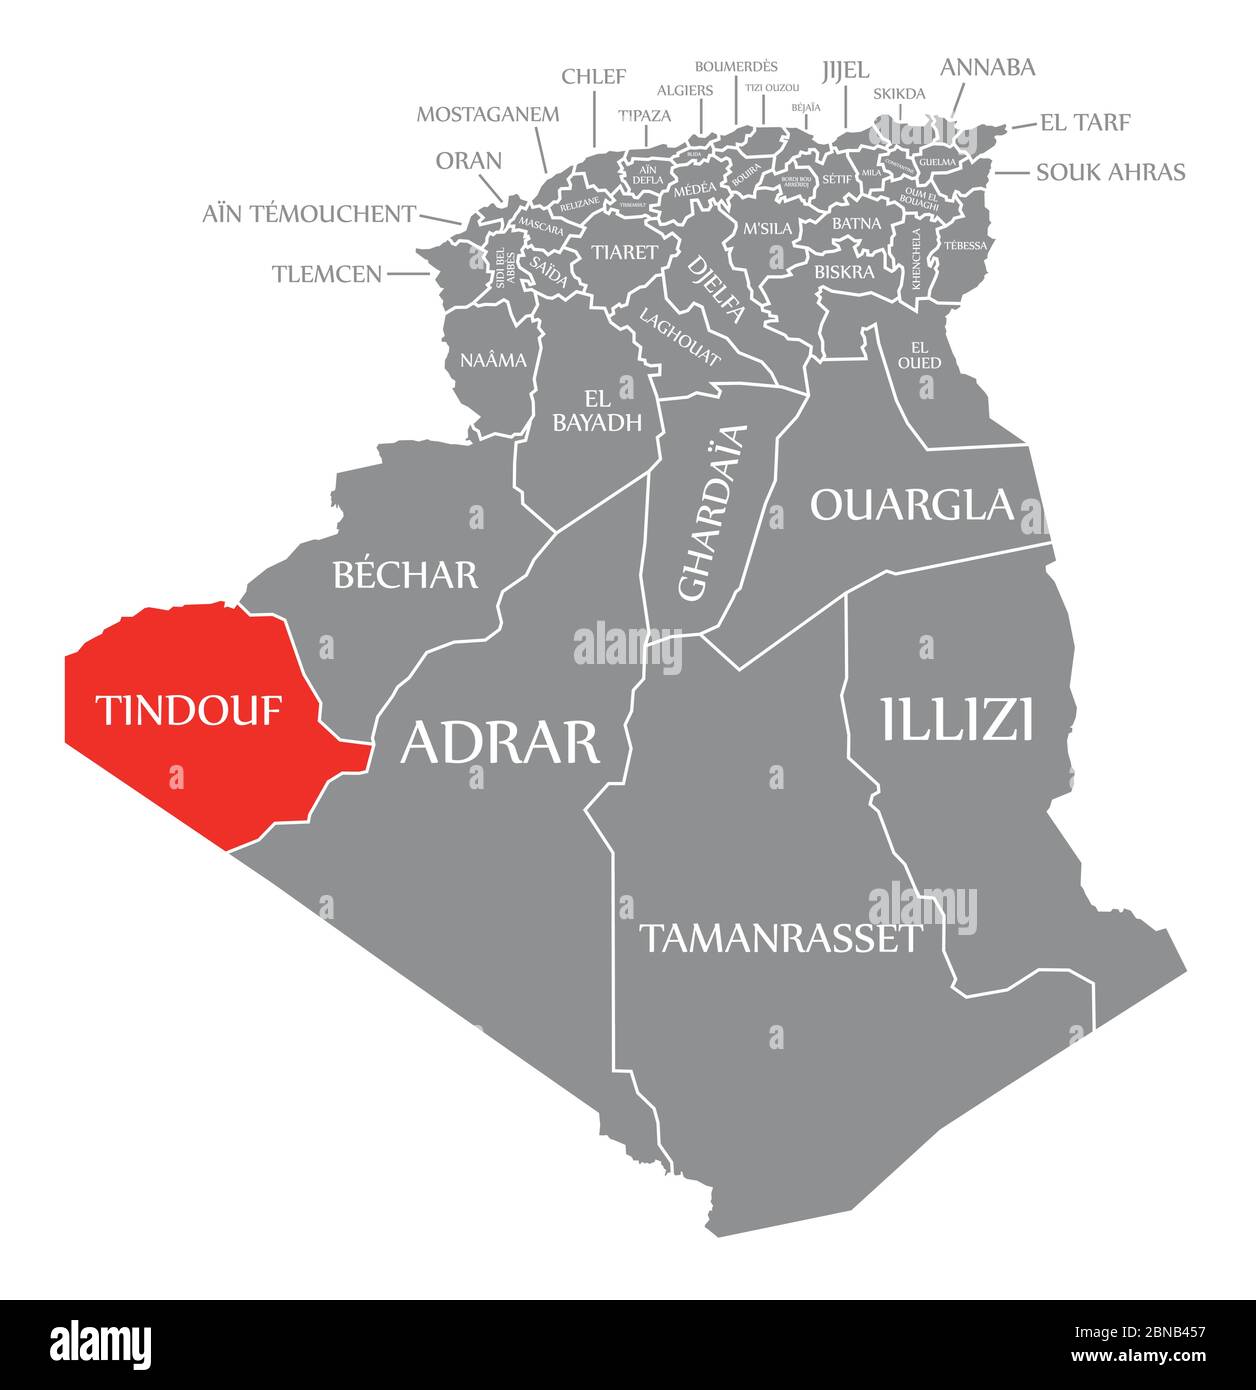 Tindouf Red Highlighted In Map Of Algeria 2BNB457 